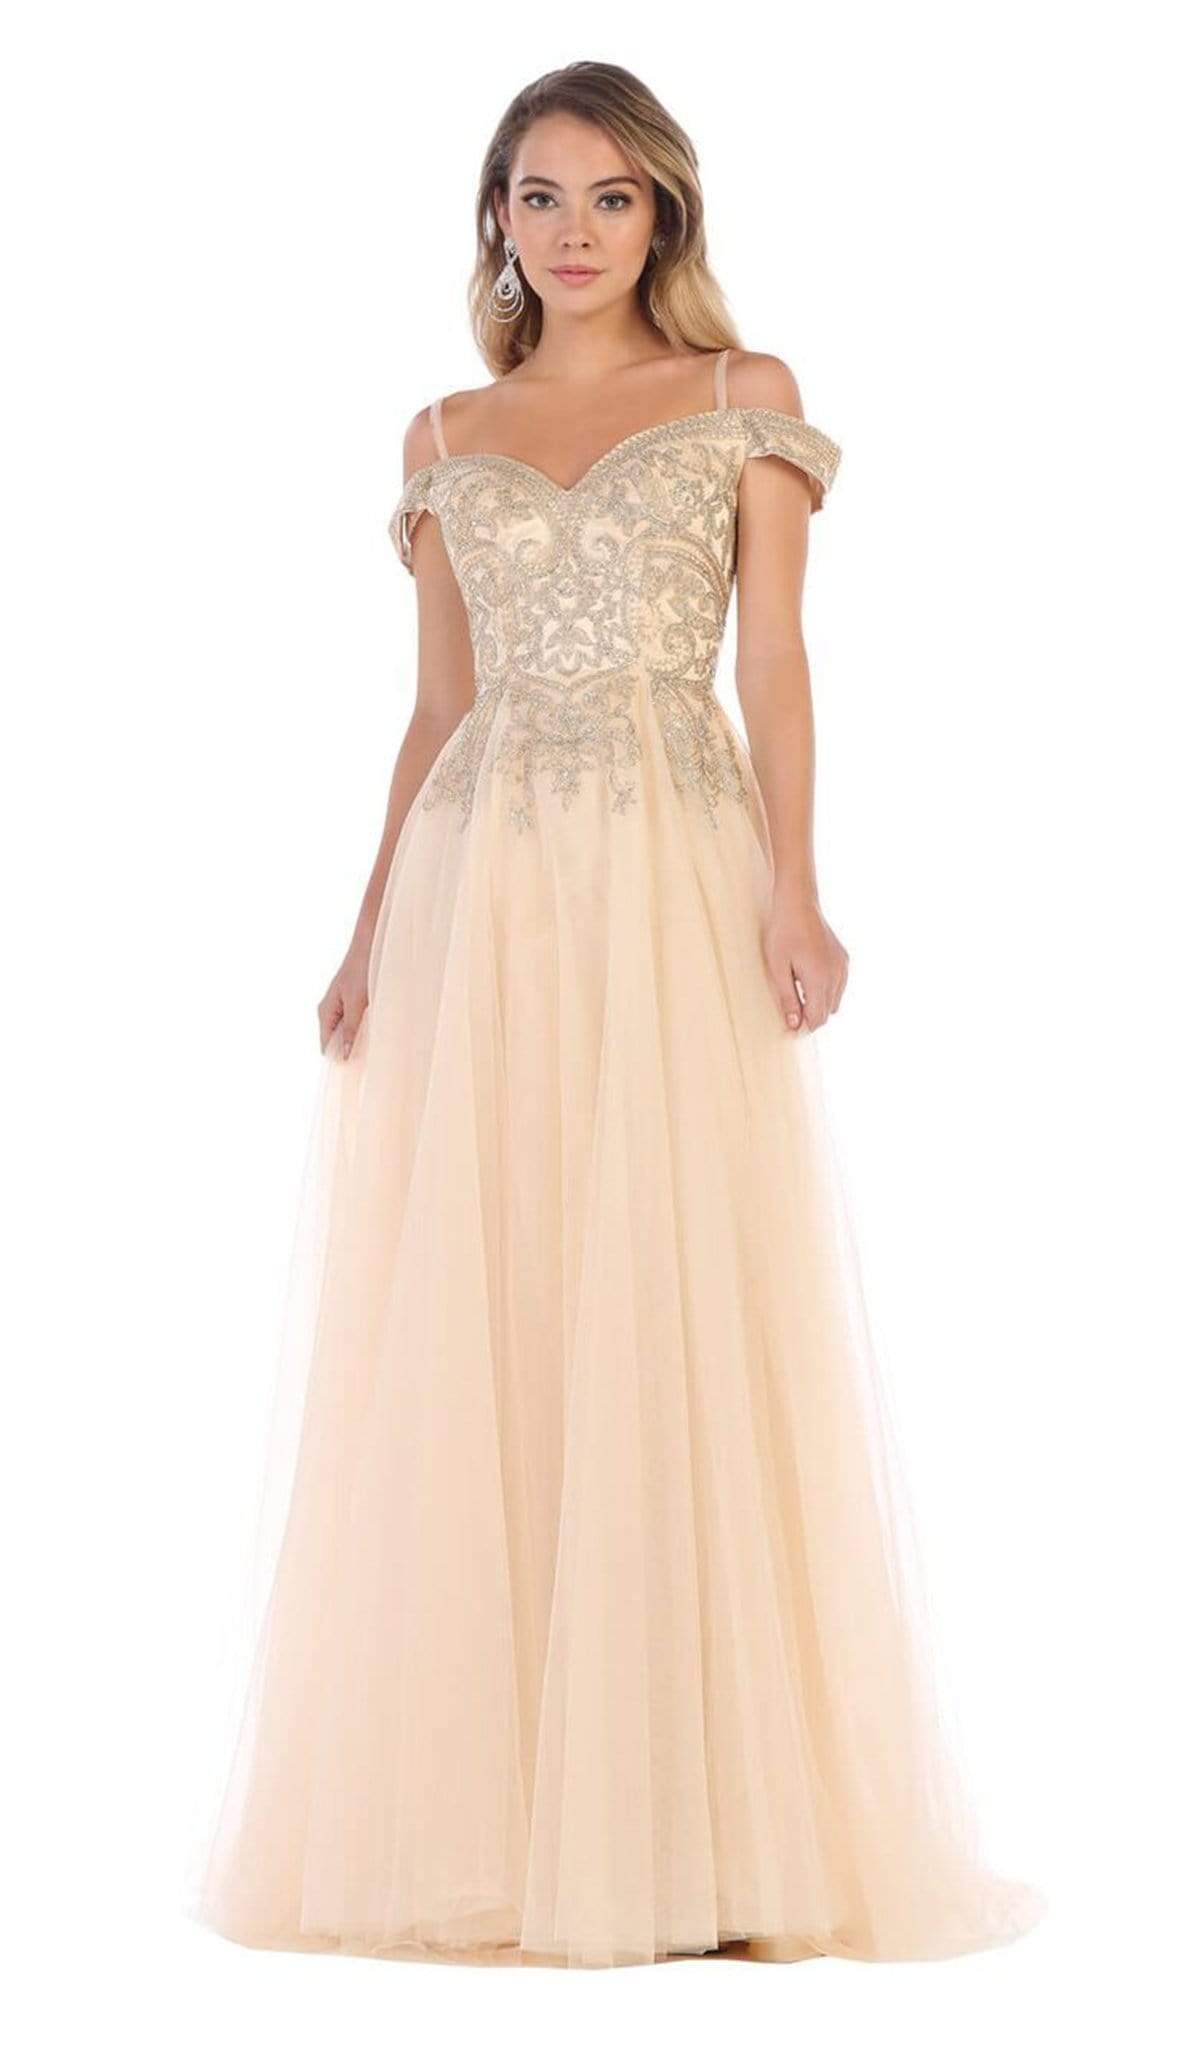 May Queen - MQ1626 Jeweled Applique Bodice Off Shoulder Gown Bridesmaid Dresses 4 / Champagne